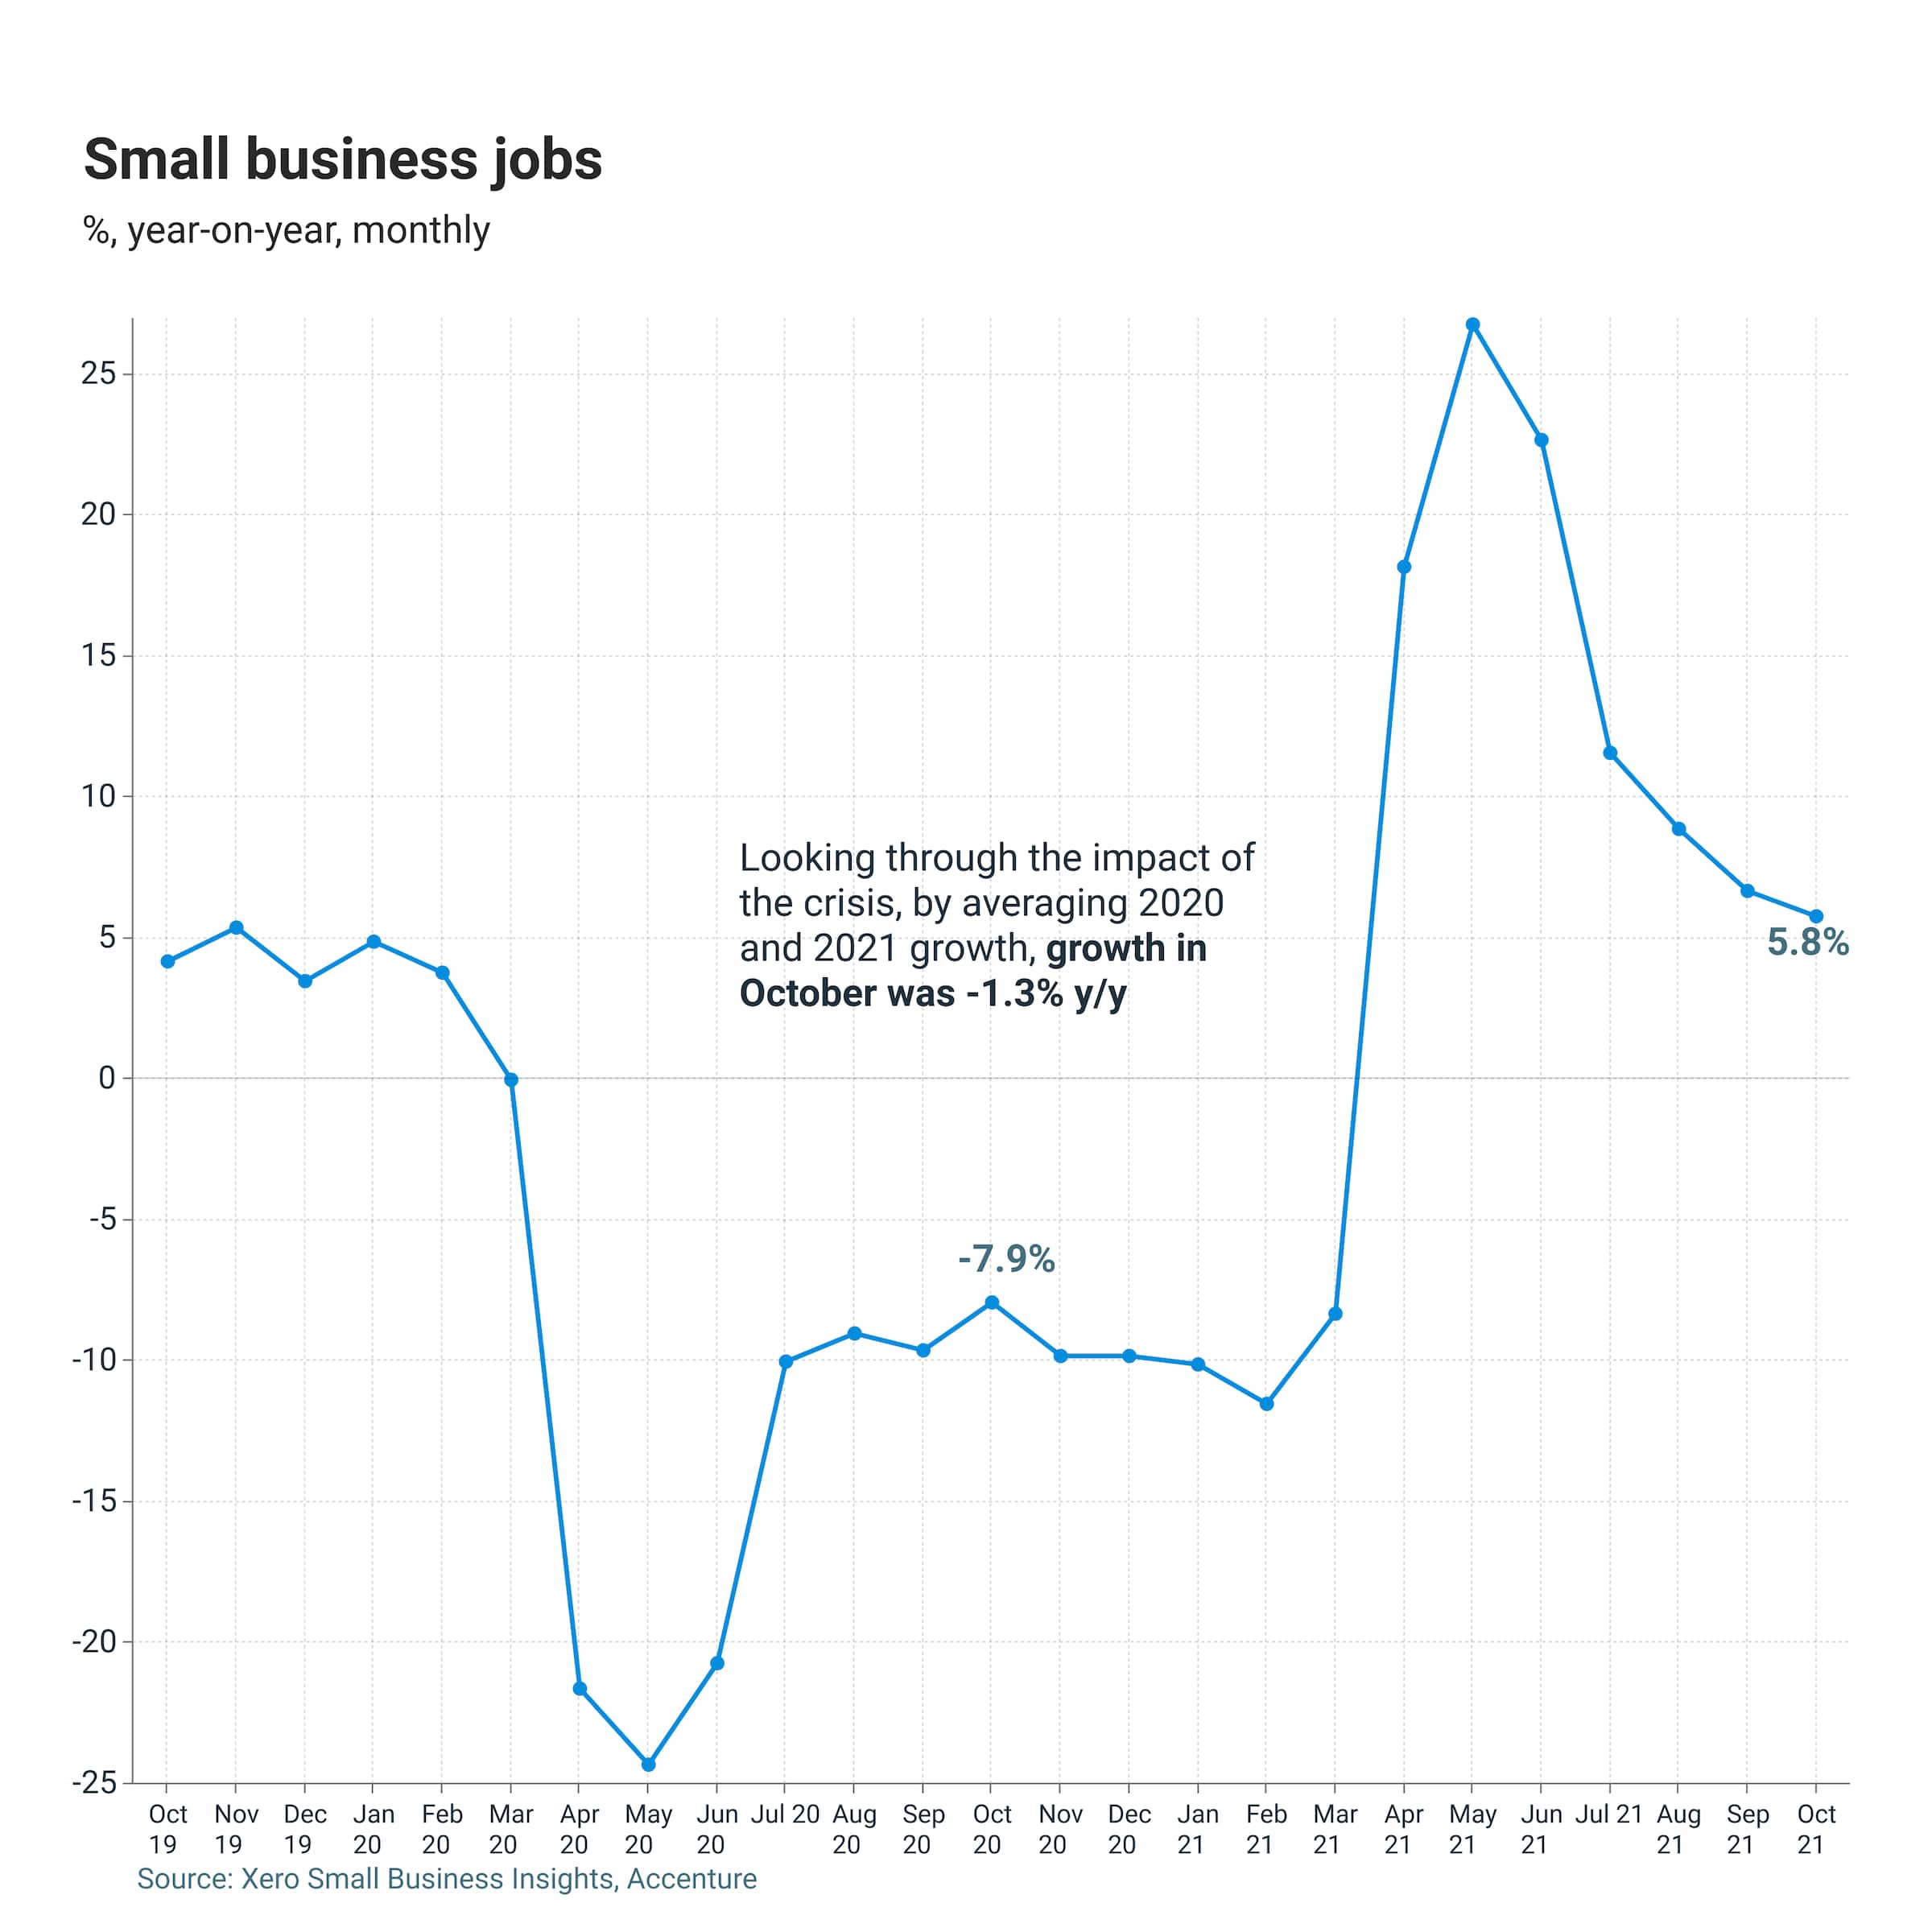 Small business jobs fell by 1.3 percent year-on-year in October